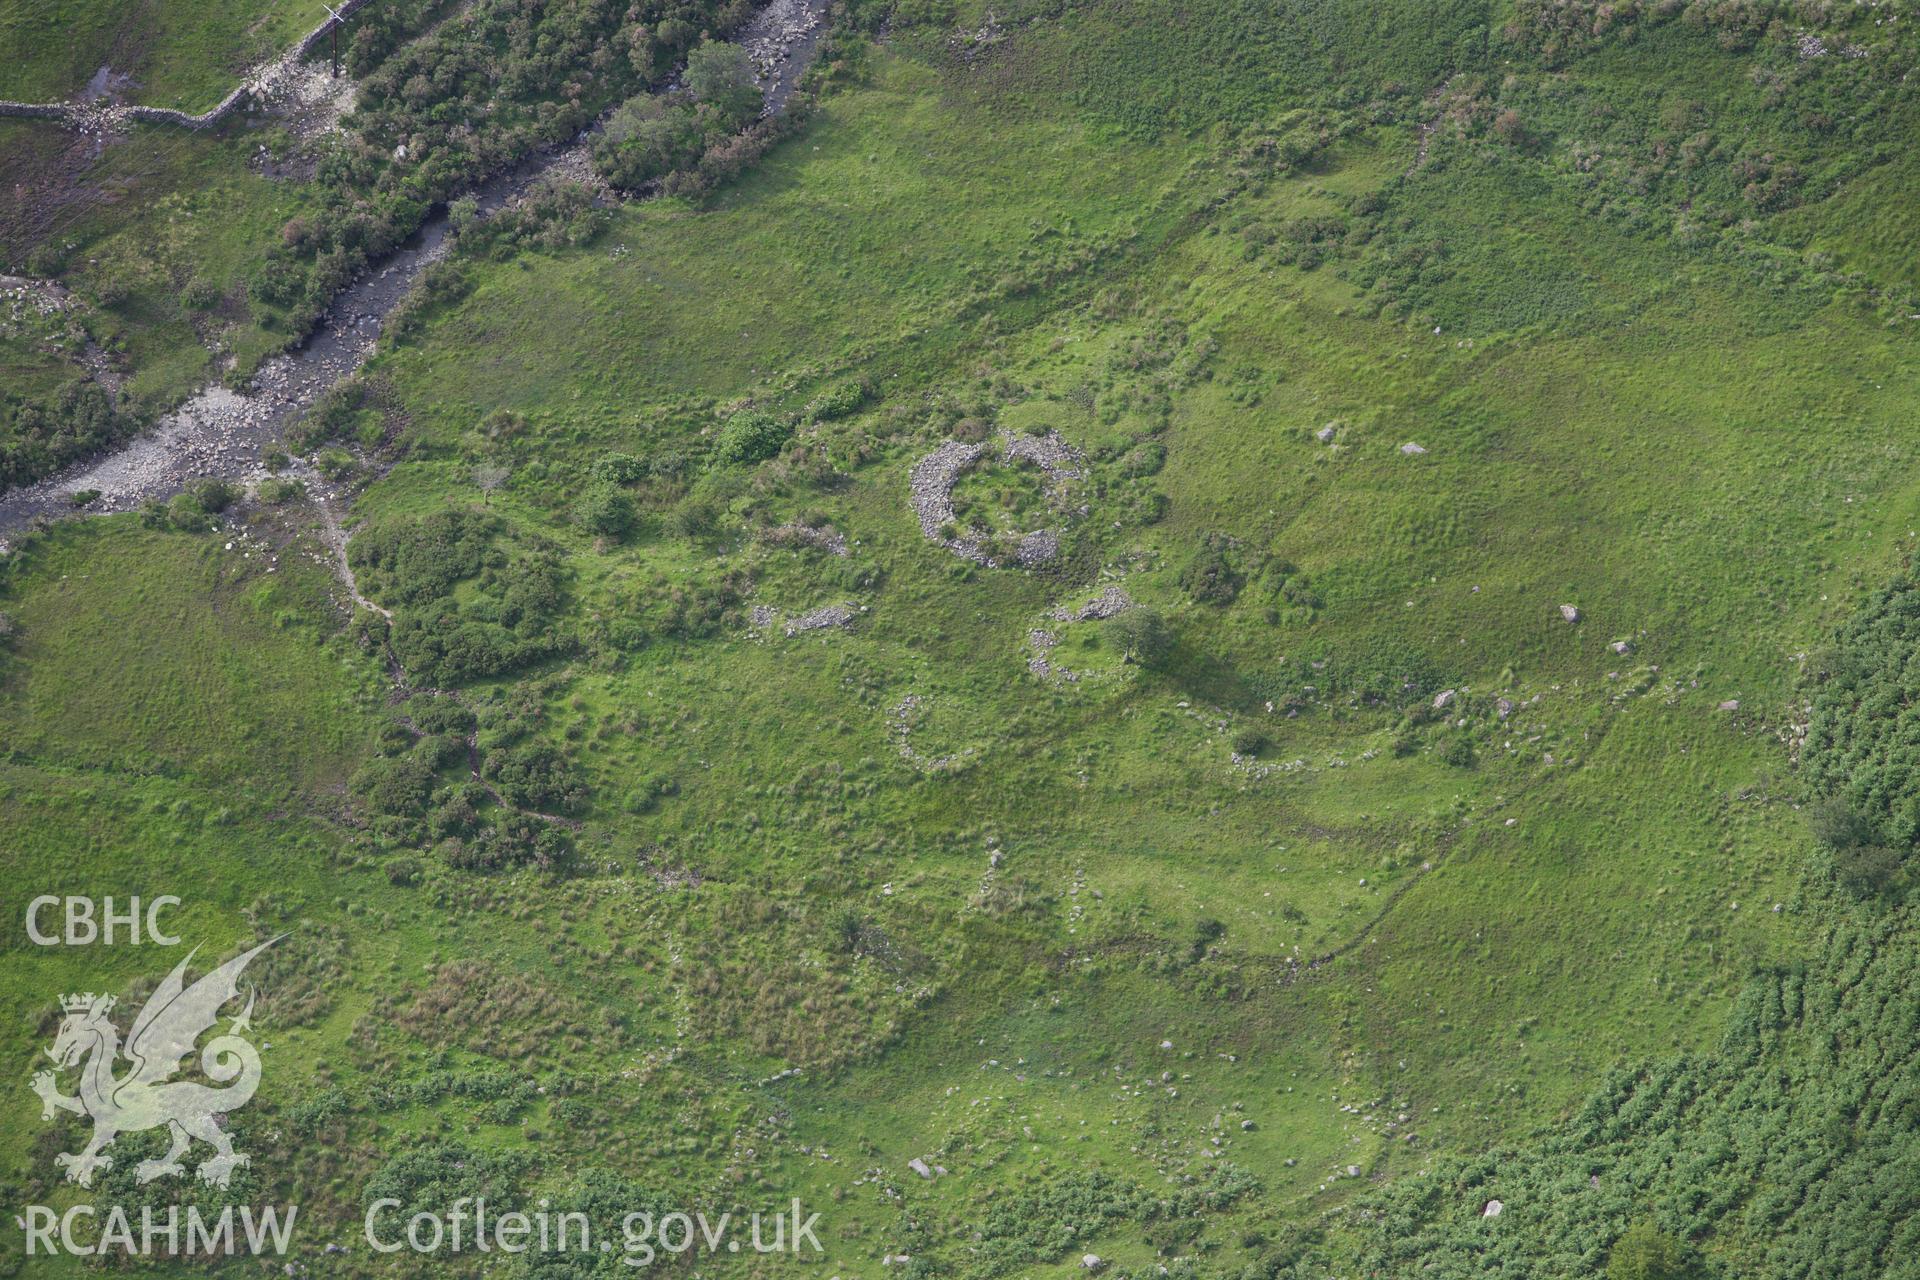 RCAHMW colour oblique aerial photograph of a hut circle settlement north of Cwm Dyli Power Station. Taken on 06 August 2009 by Toby Driver